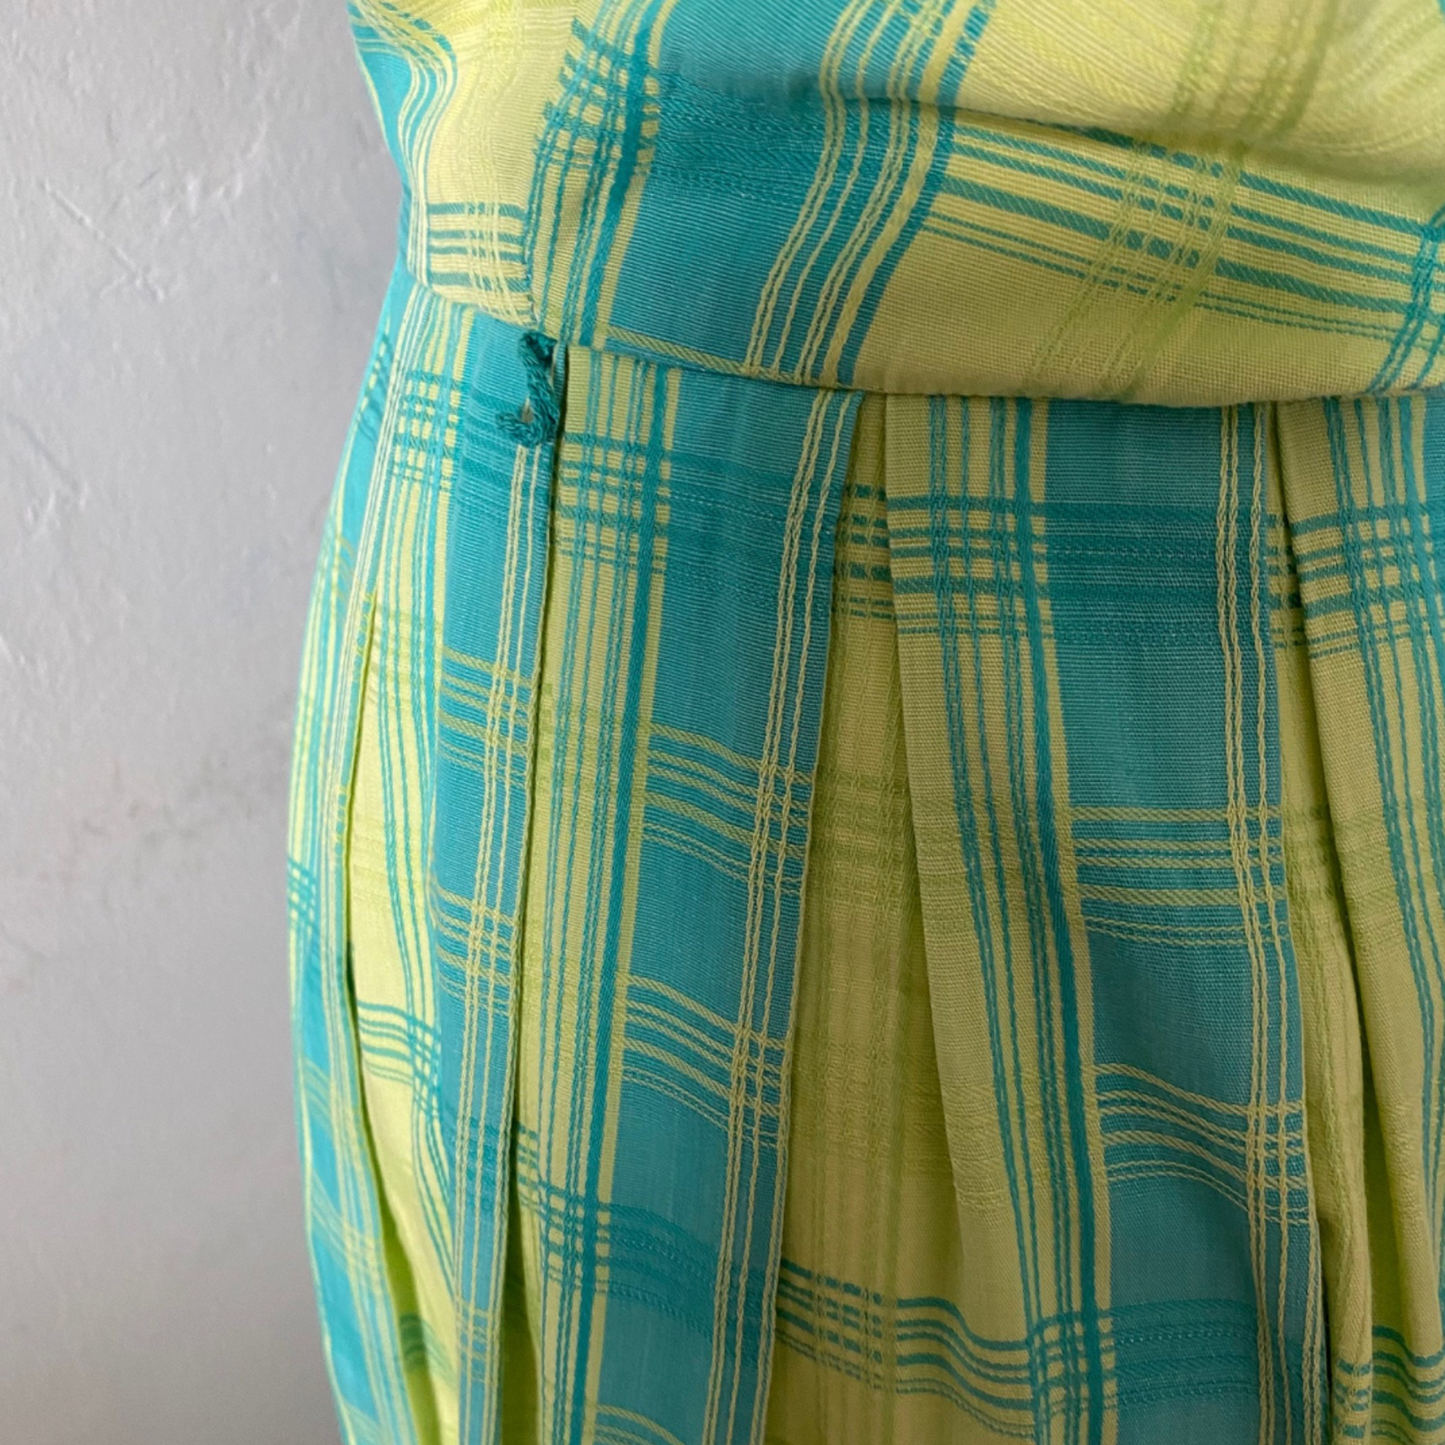 50s cotton blue and green checked summer dress . Approx  UK  8-10